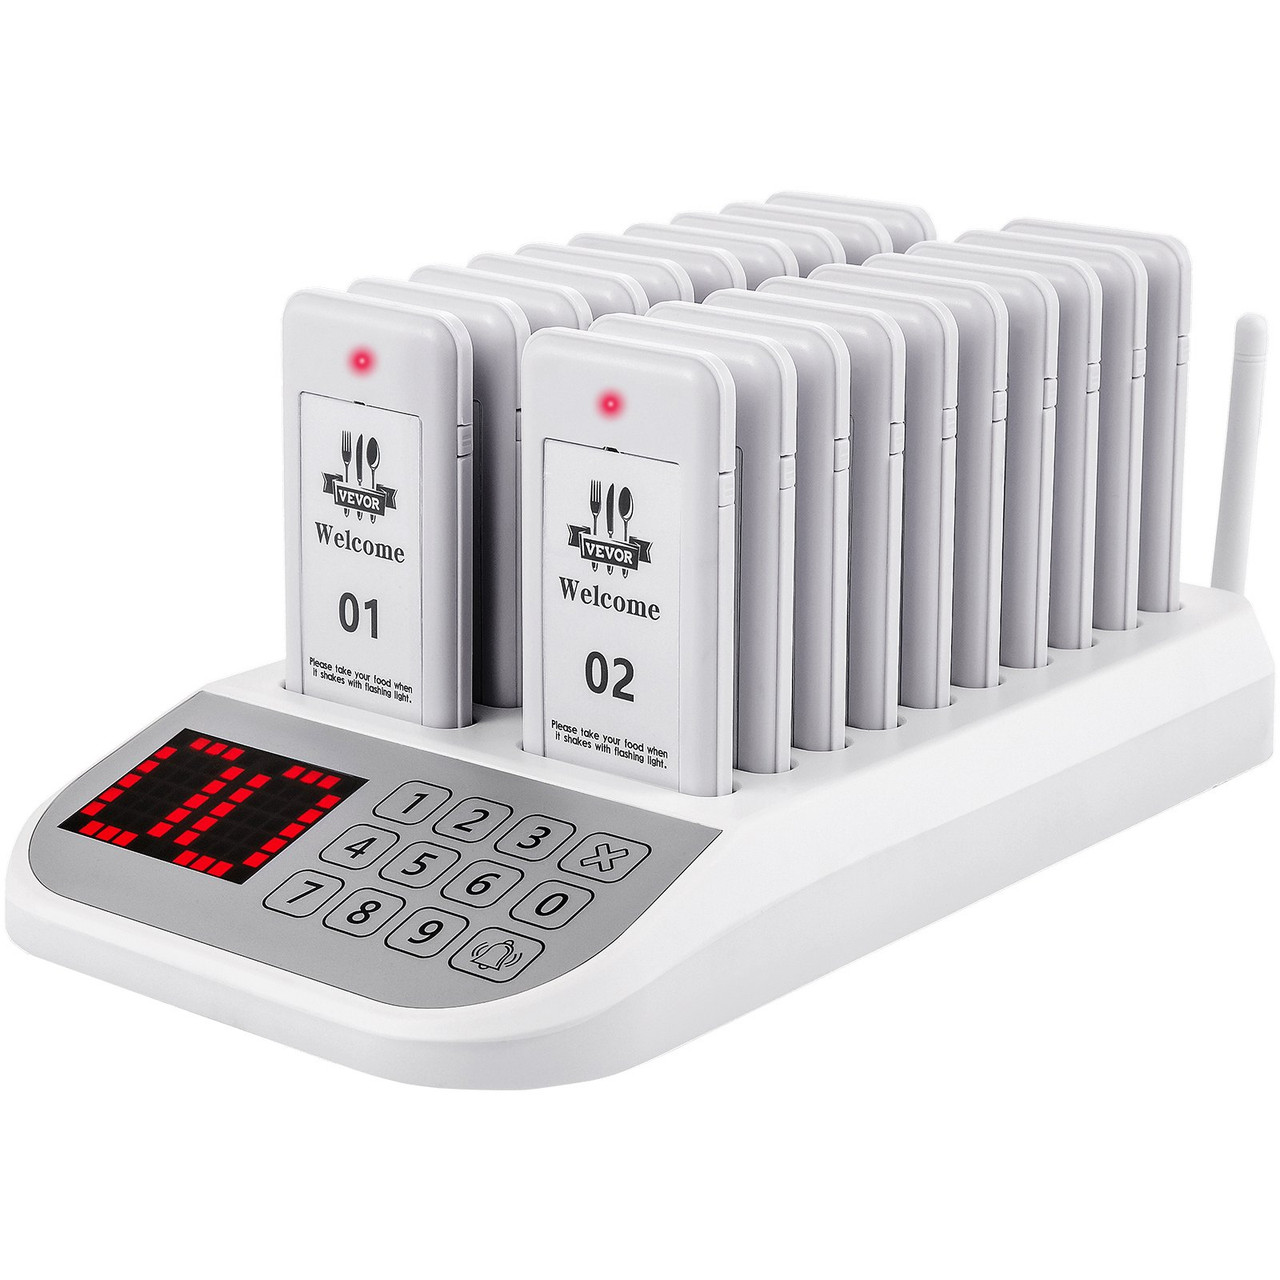 Restaurant Pager System 20 Coasters Max 98 Nursery Pager Wireless Paging Queuing Calling System 350-500m with Vibration, Flashing and Buzzer for Social Distance Food Truck Hotels Cafes